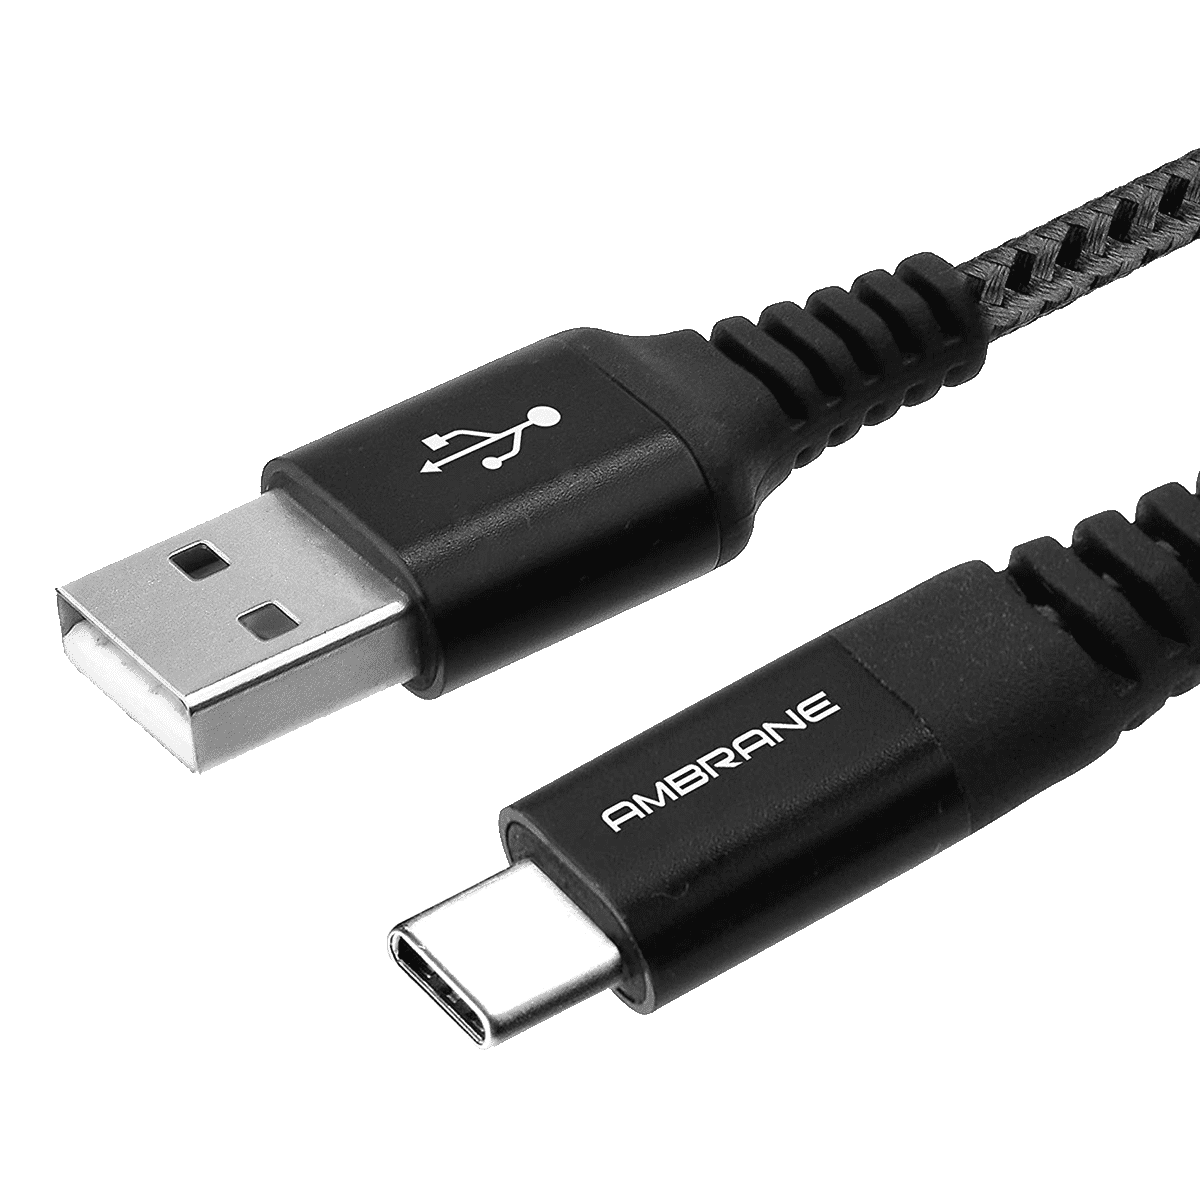 Buy Croma USB 2.0 Type A to USB 2.0 Type C Charging Cable (Braided